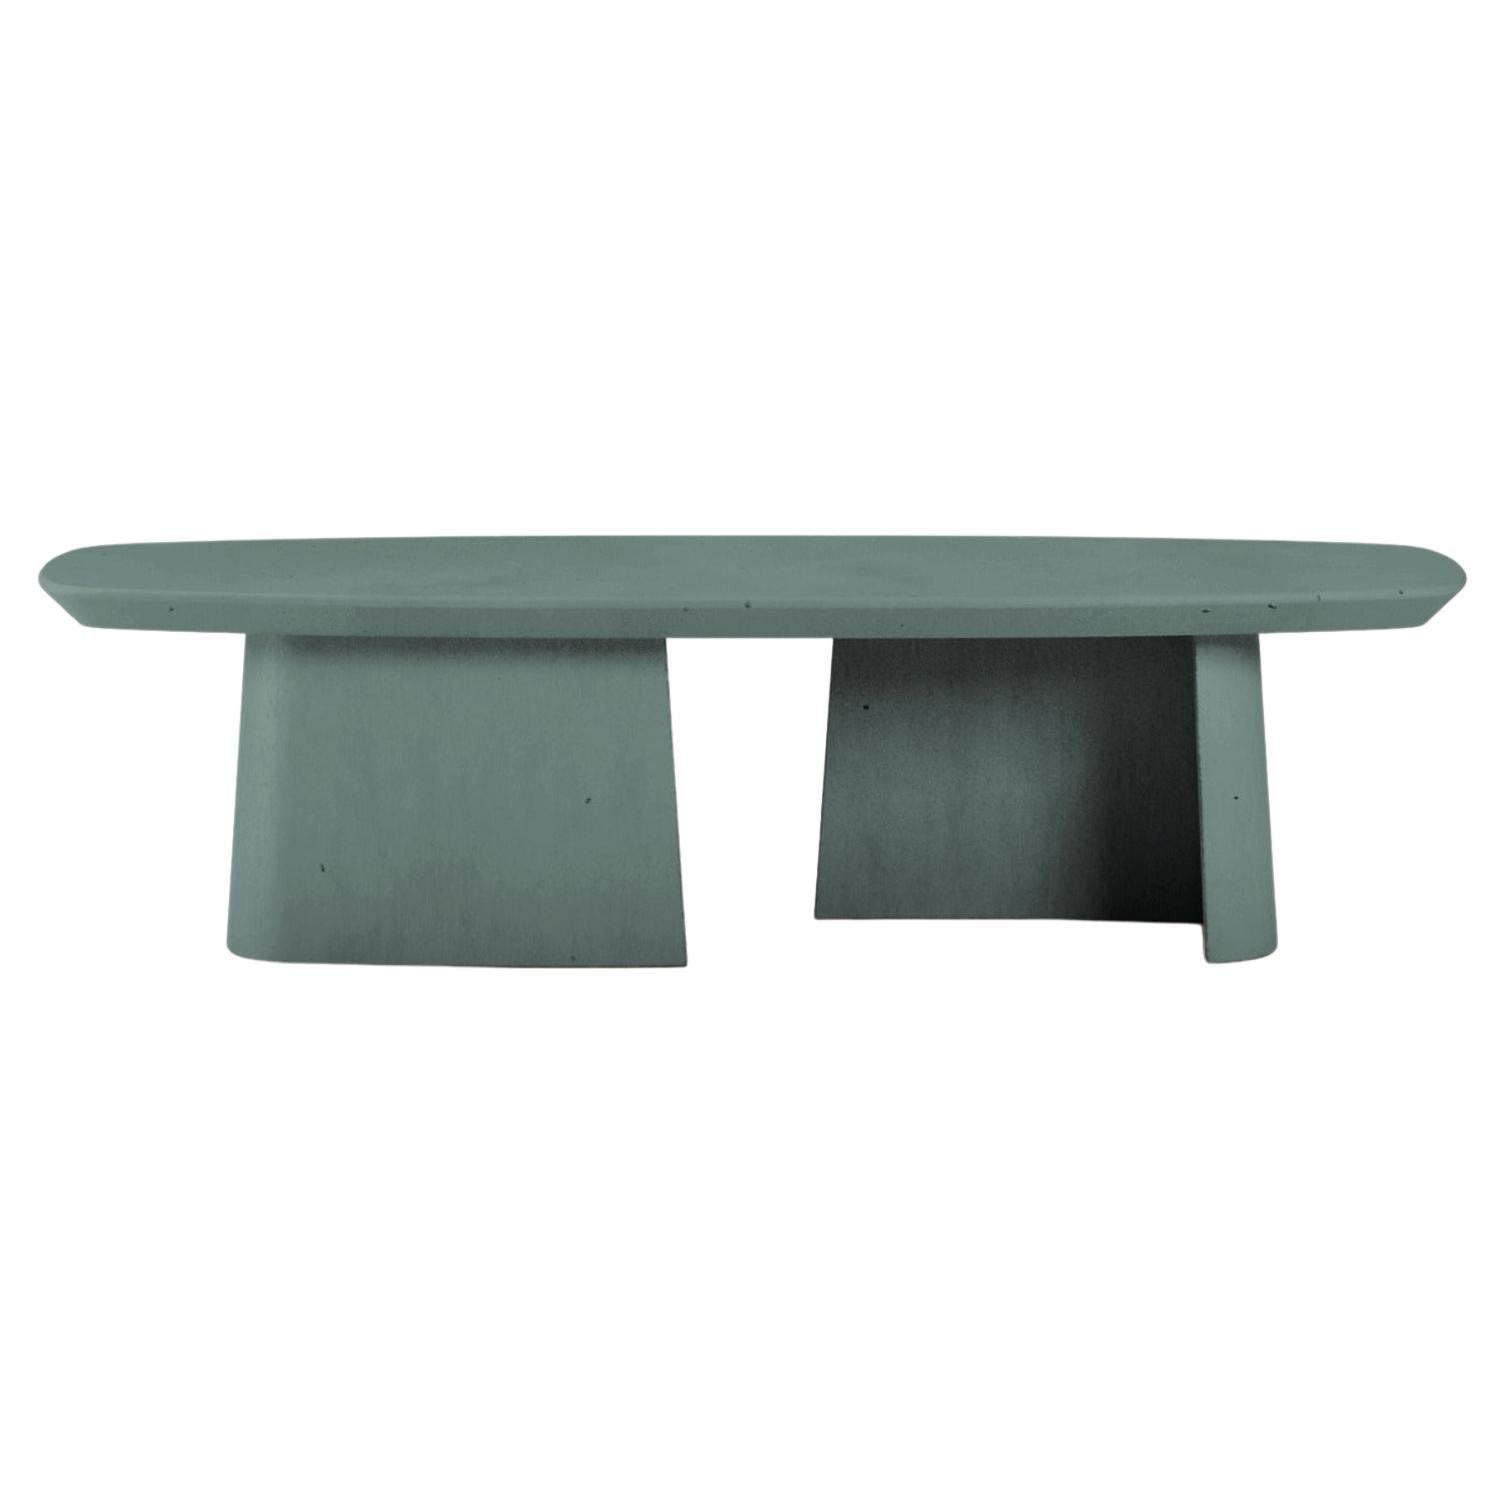 Concrete Bench Flora Handmade in Italy Ultramarine Cement shade by Forma&Cemento For Sale